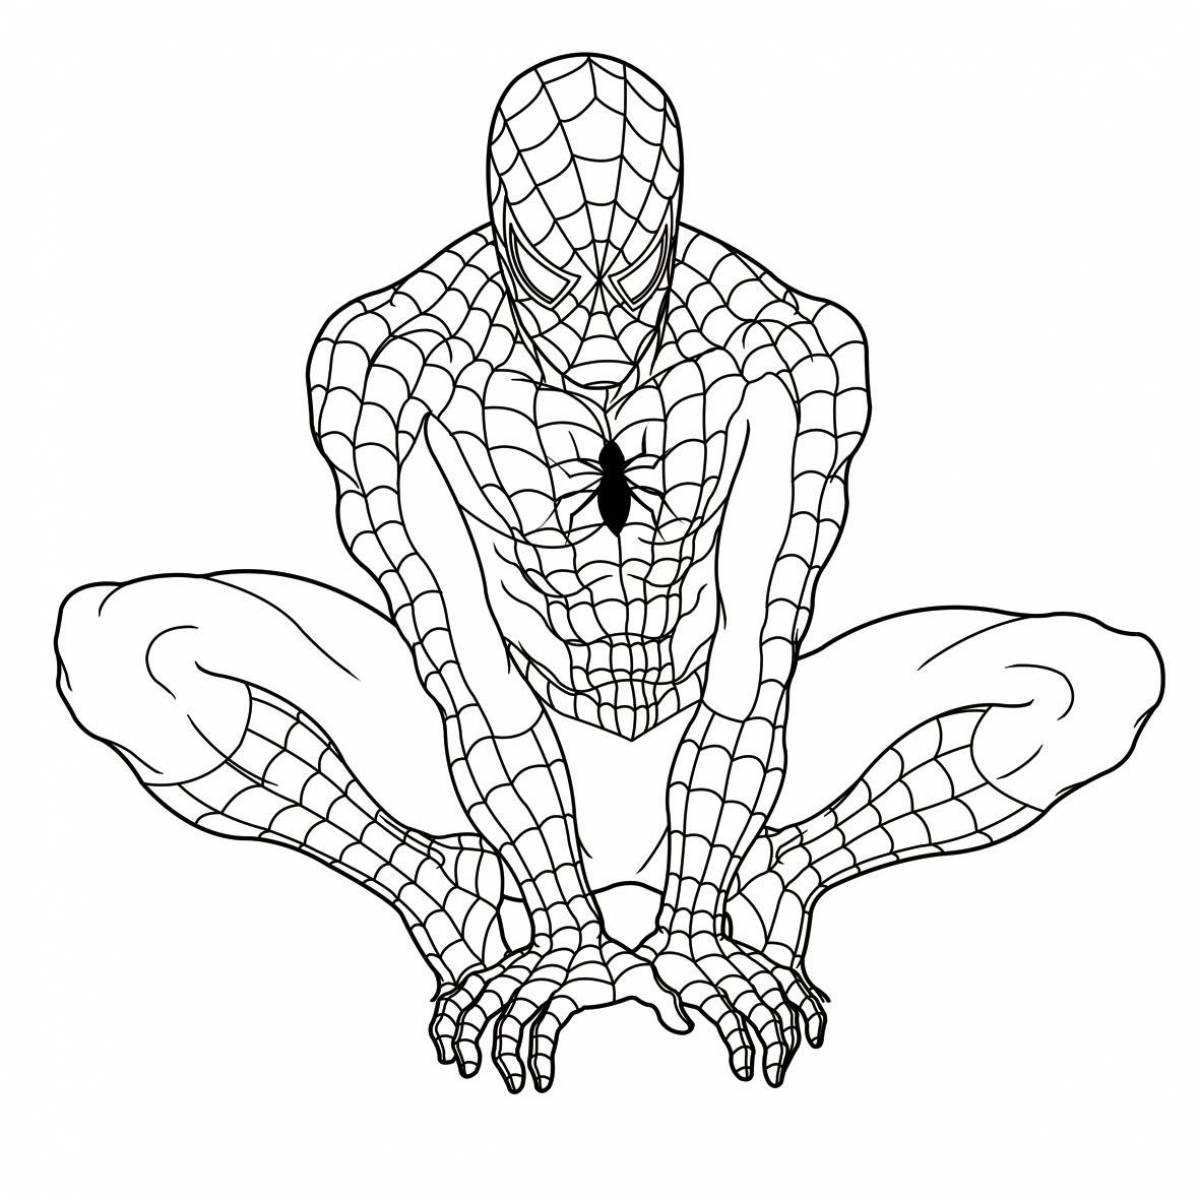 Spider man in good quality #1